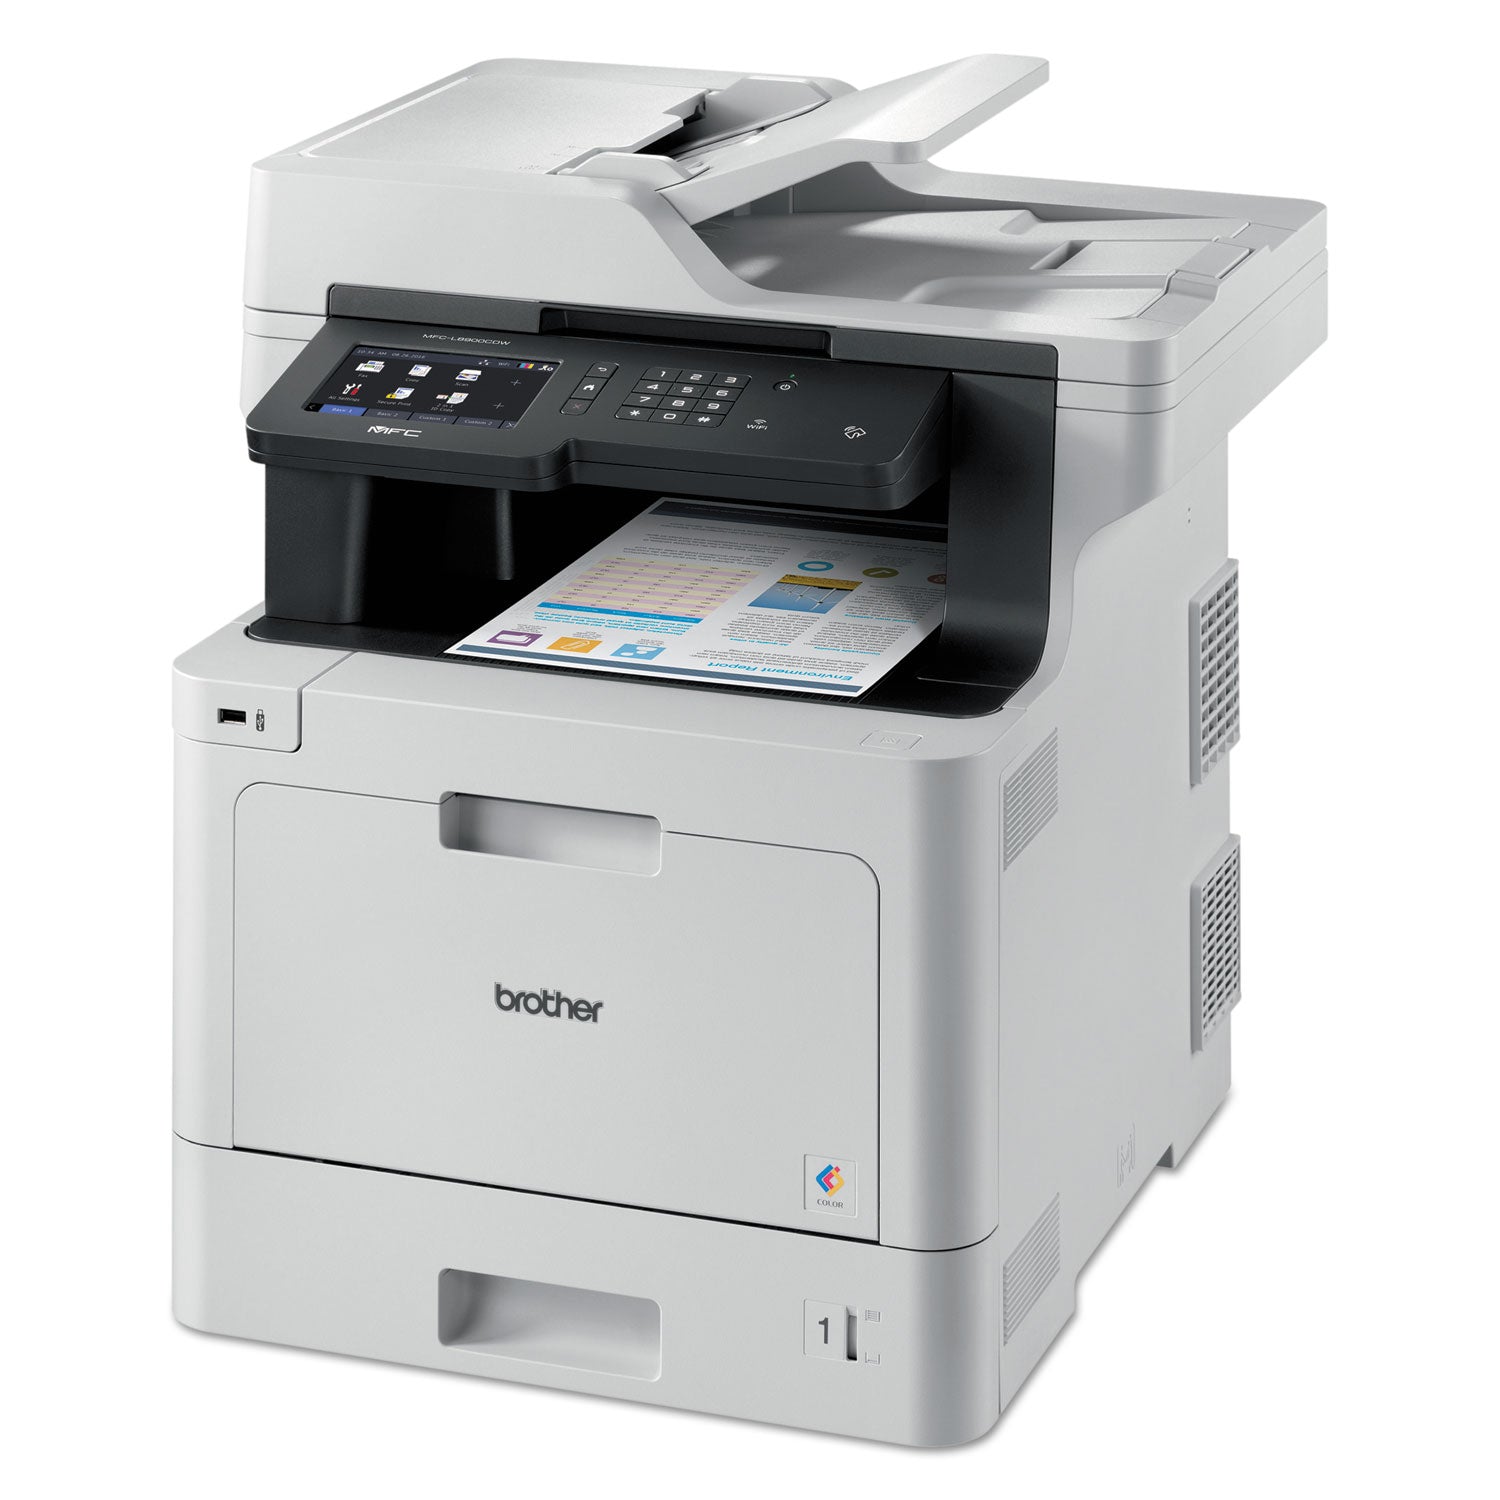 mfcl8900cdw-business-color-laser-all-in-one-printer-with-duplex-print-scan-copy-and-wireless-networking_brtmfcl8900cdw - 2